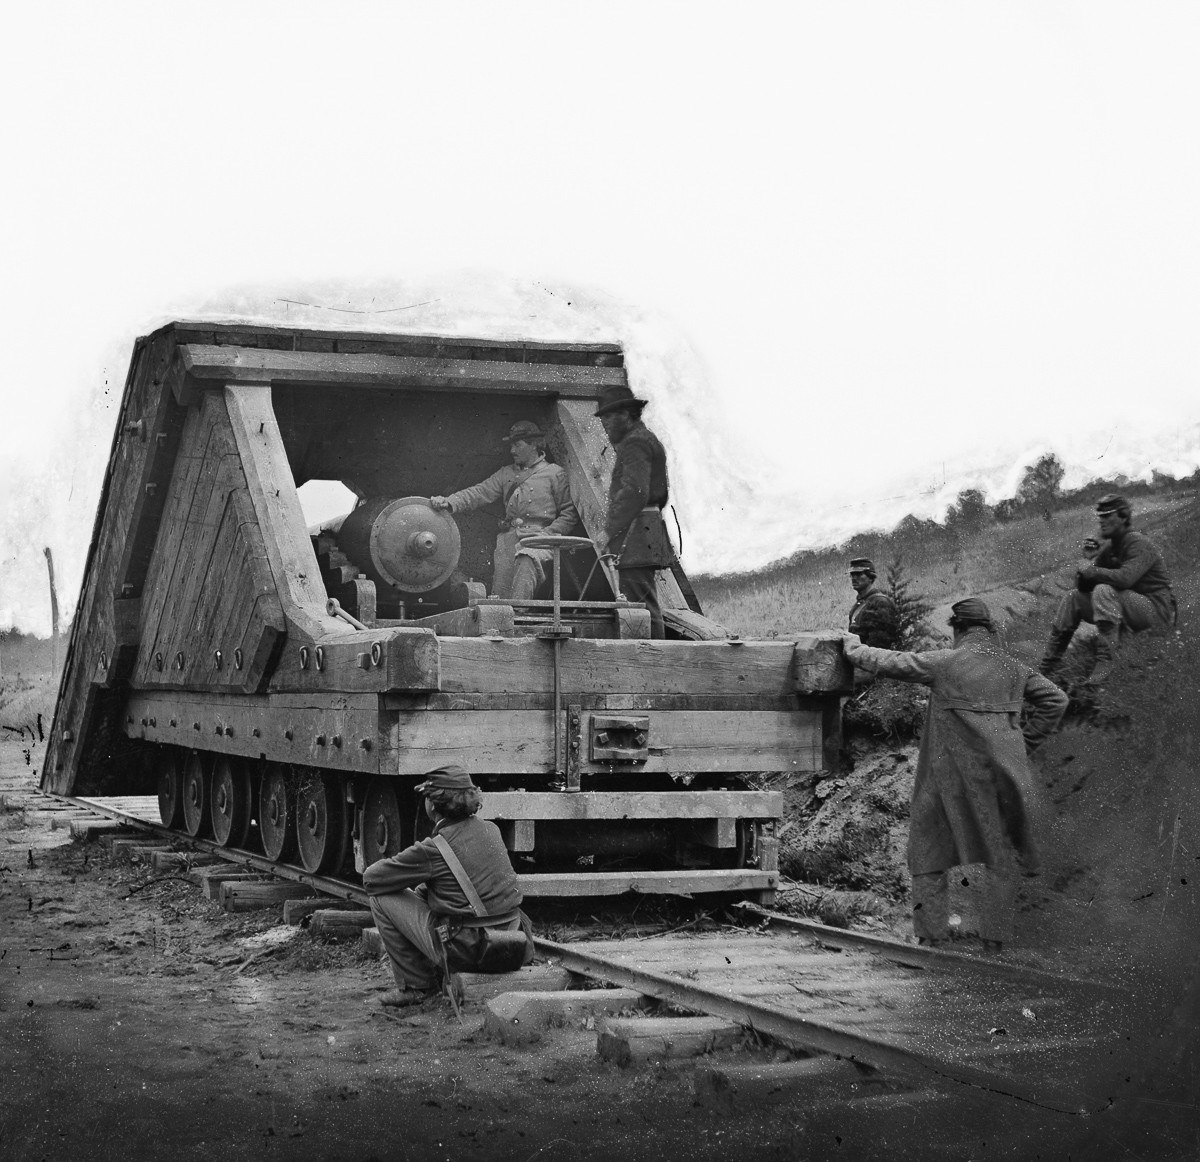 Petersburg, Va. Railroad gun and crew. Photo shows Robert E. Lee's railroad battery. (Source: David H. Schneider, Lee's Armored Car, Civil War Times, Feb. 2011.) Photograph from the main eastern theater of war, the siege of Petersburg, June 1864-April 1865.